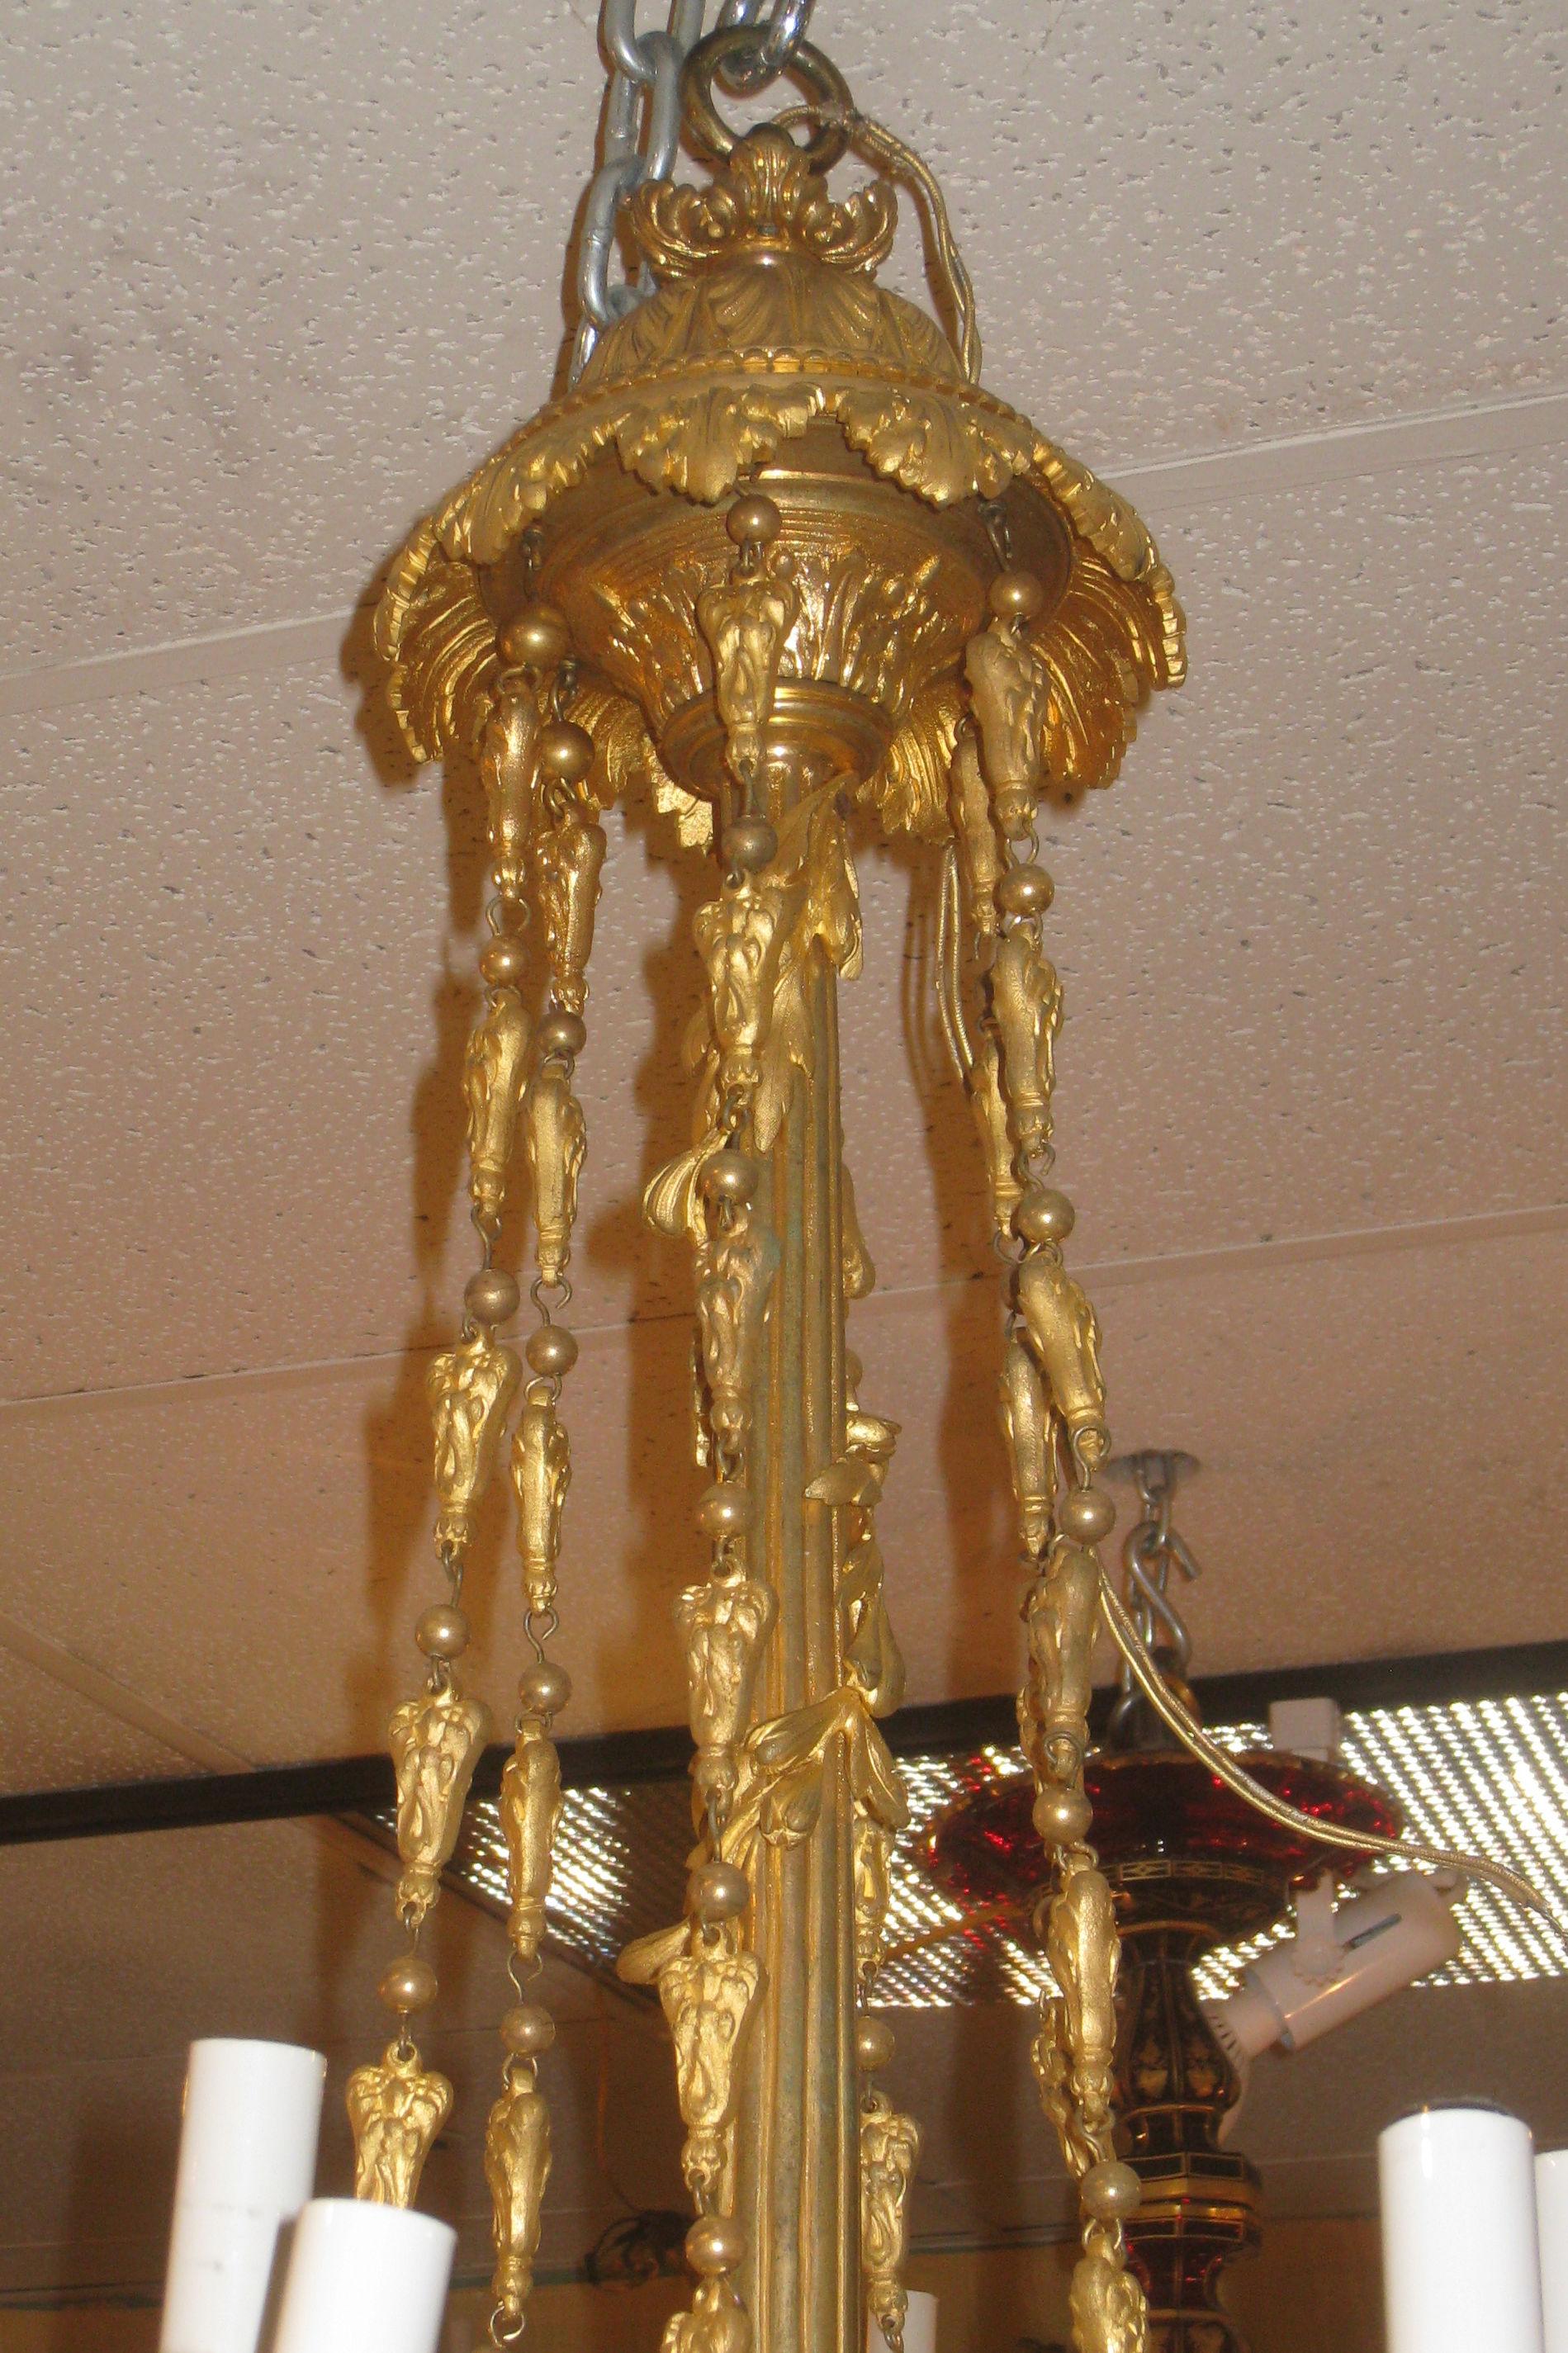 French 19th Century 18-Light Gilt Bronze Chandelier in Louis XVI Style For Sale 2